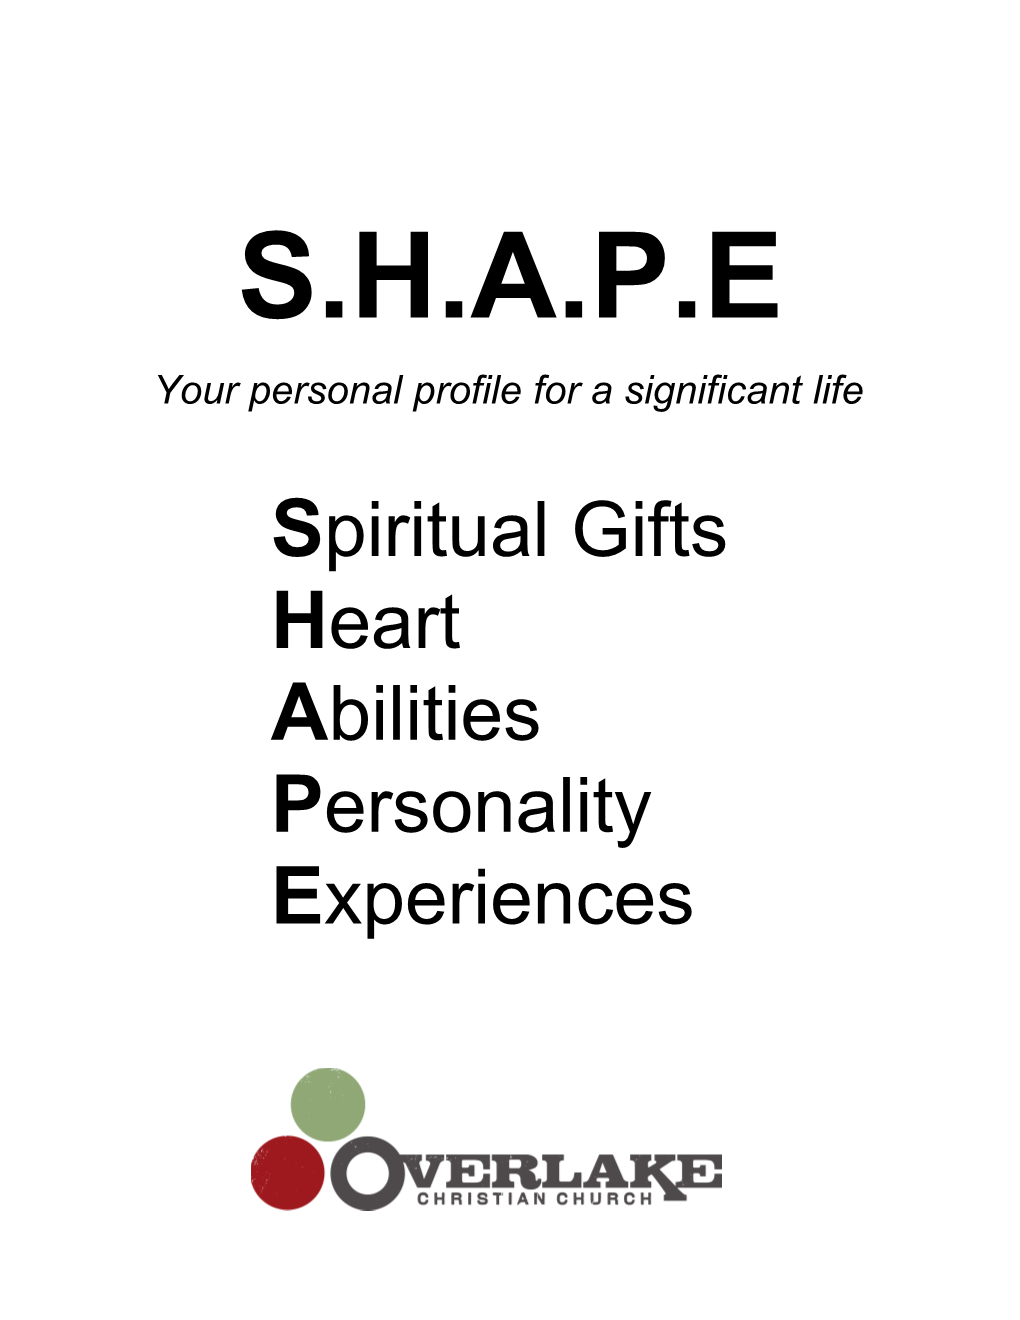 Your Personal Profile for a Significant Life